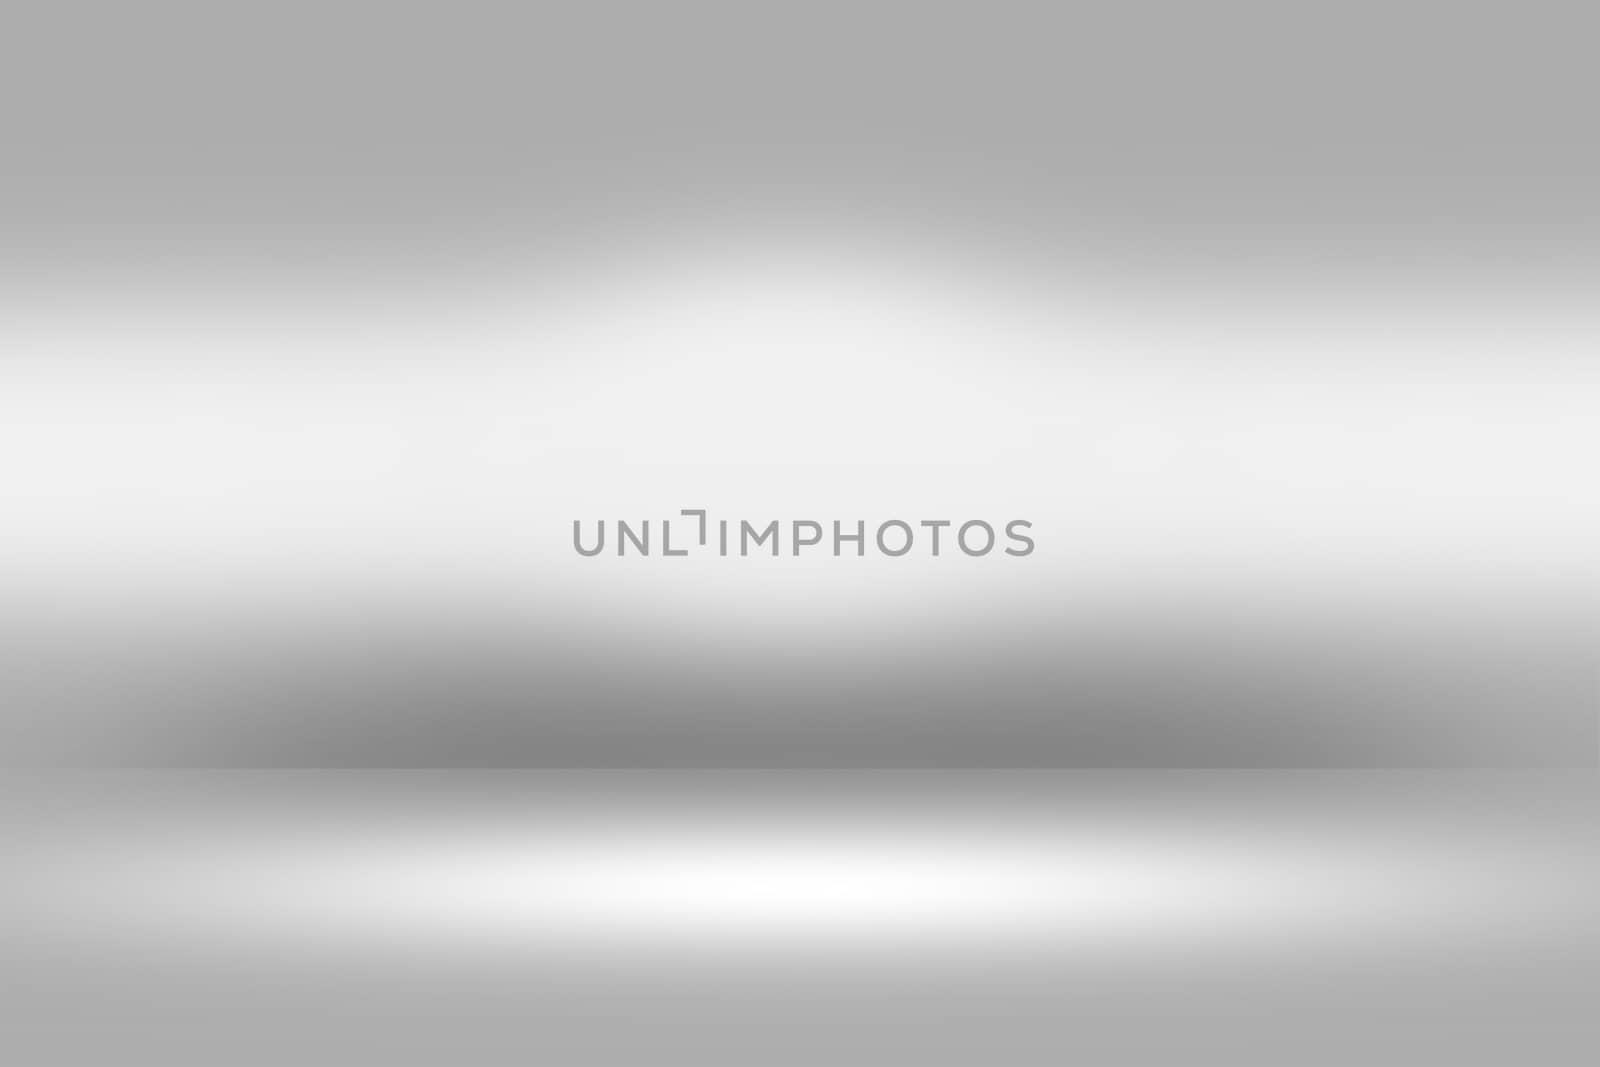 Product Showscase Spotlight Background - Crisp and Clear Infinite White Floor by Loud-Mango